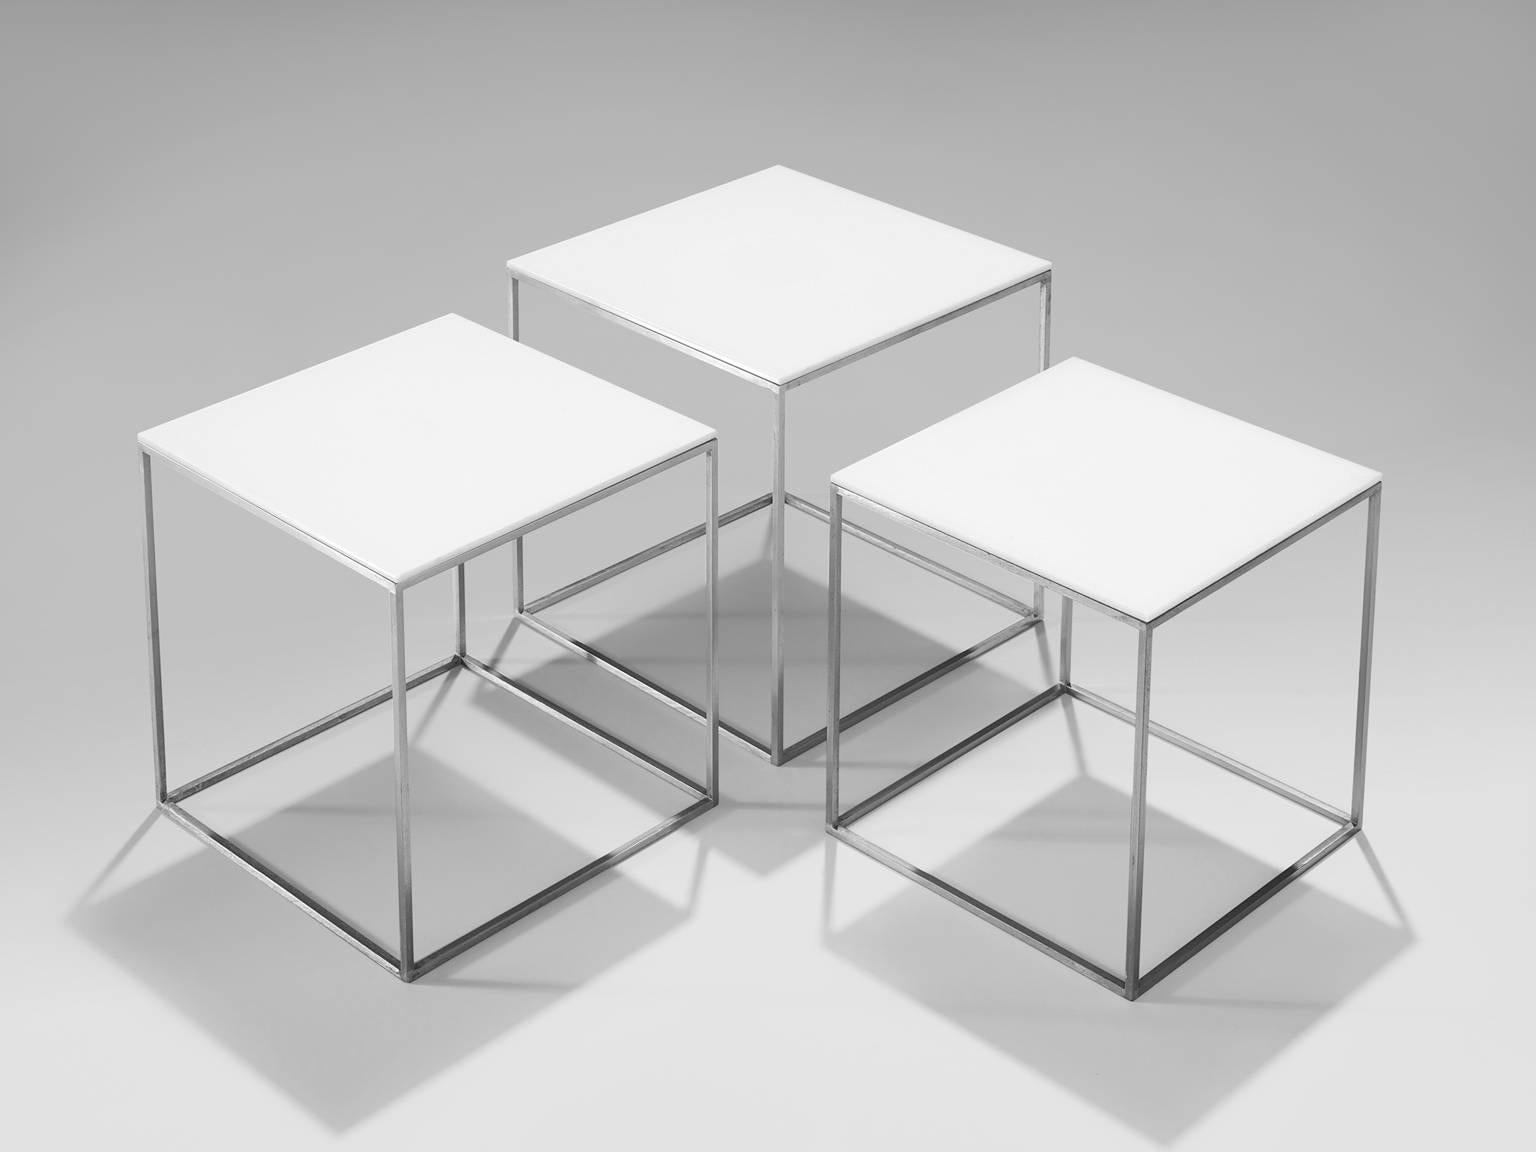 Poul Kjærholm, nesting tables, white acrylic and steel, Denmark, circa 1957.

These modernist Danish nesting tables were manufactured in Denmark by fE. Kold Christensen. They feature a chrome frame, with a white acrylic slick top and an open